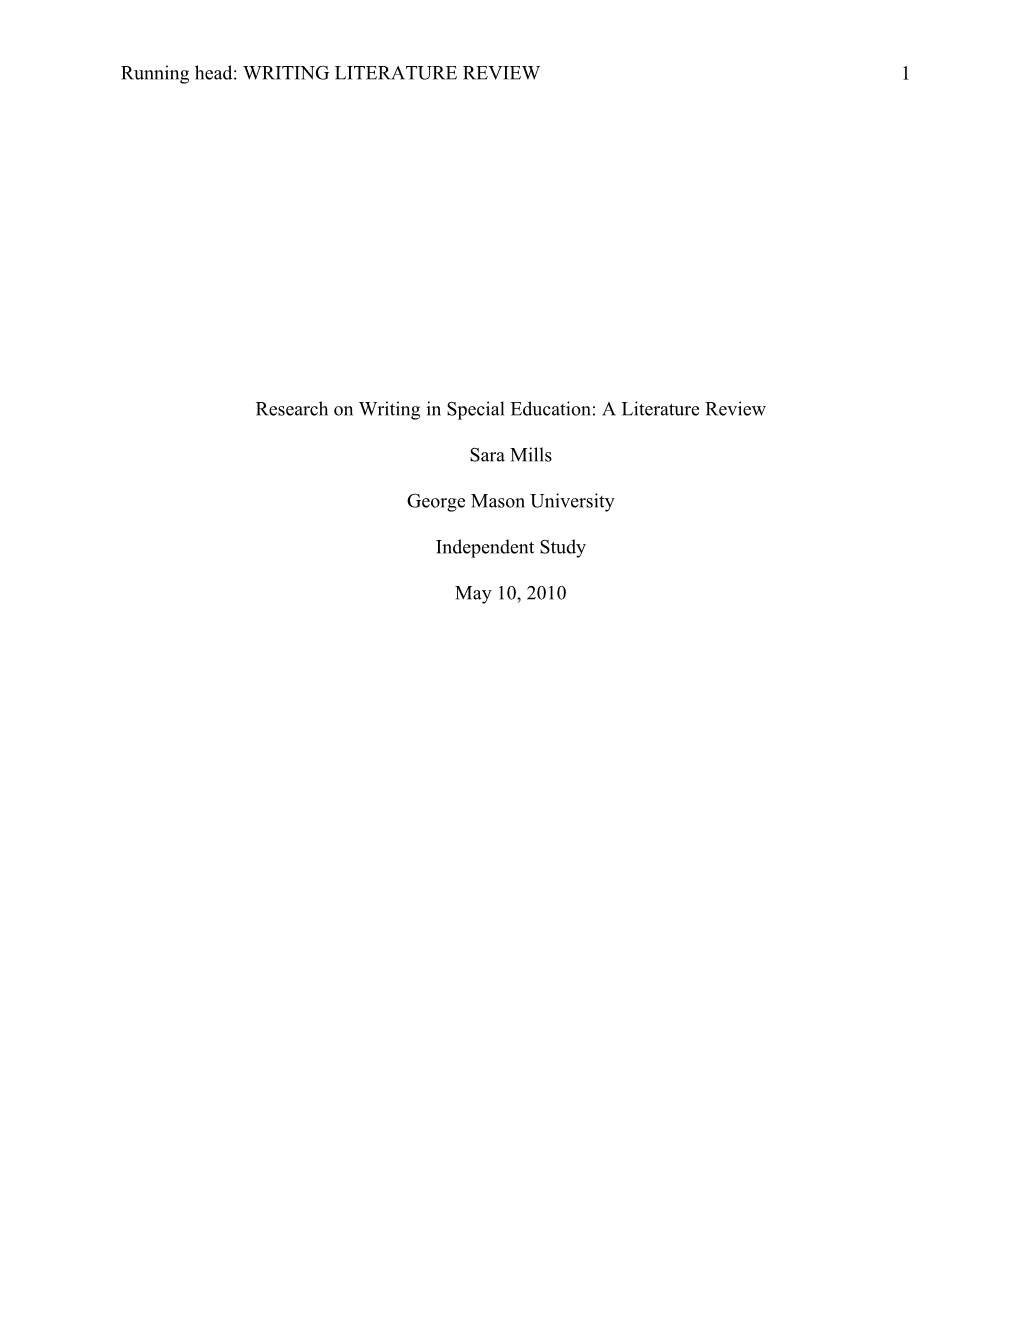 Research on Writing in Special Education: a Literature Review